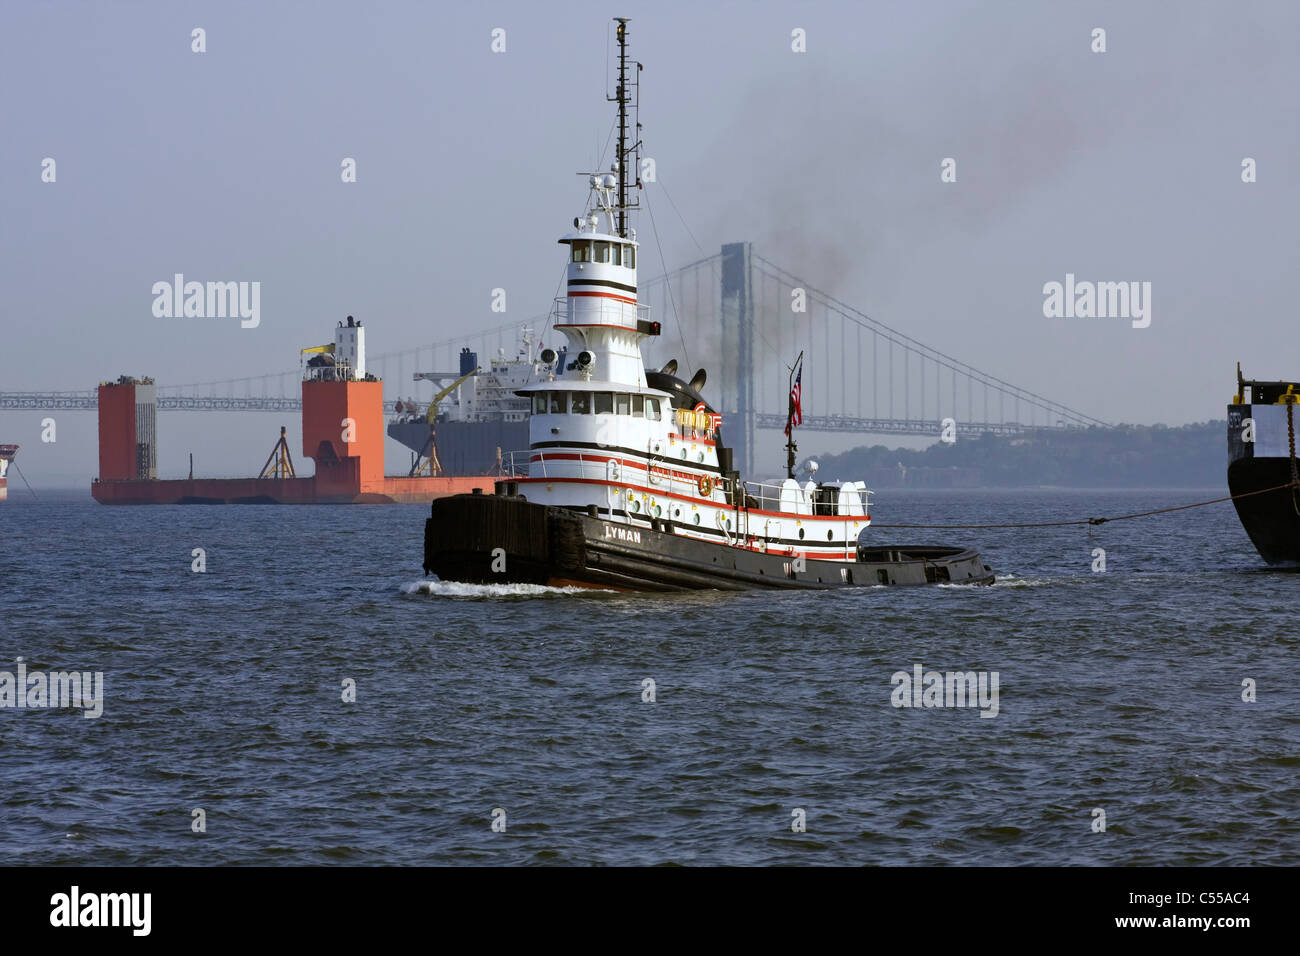 Tugboat 'LYMAN' towing a barge in New York Harbor Stock Photo